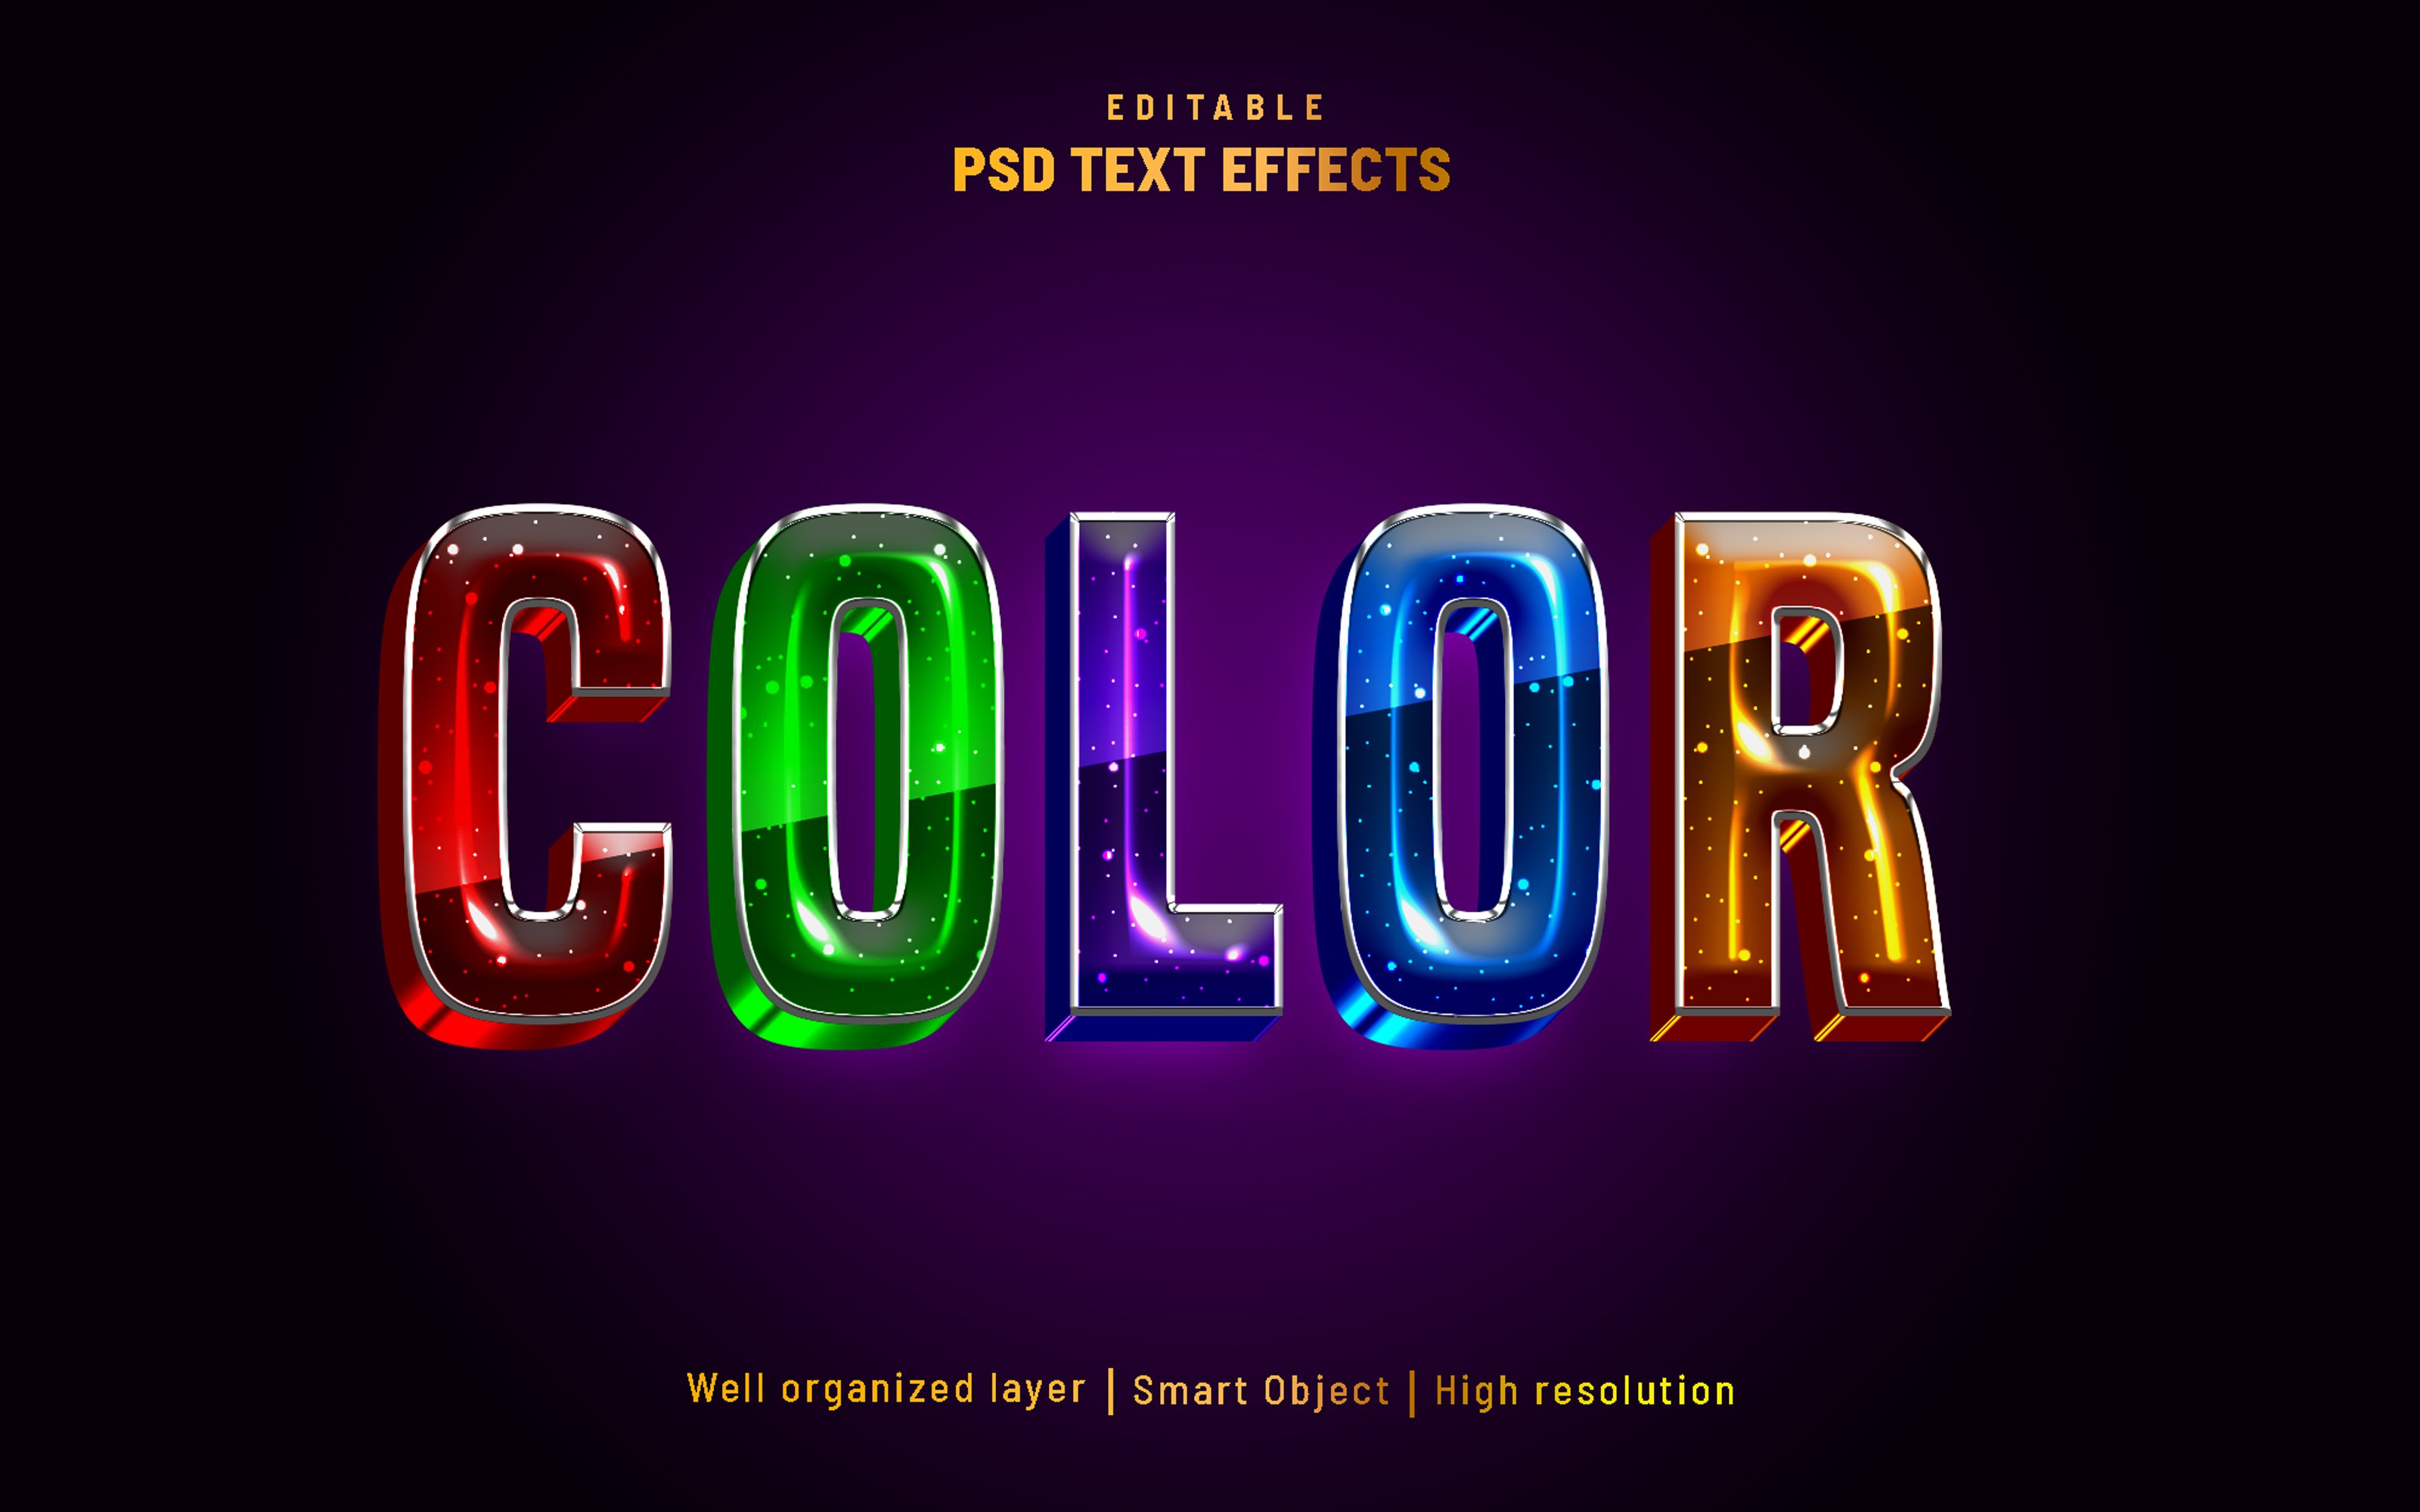 Color Editable text effect PSDcover image.